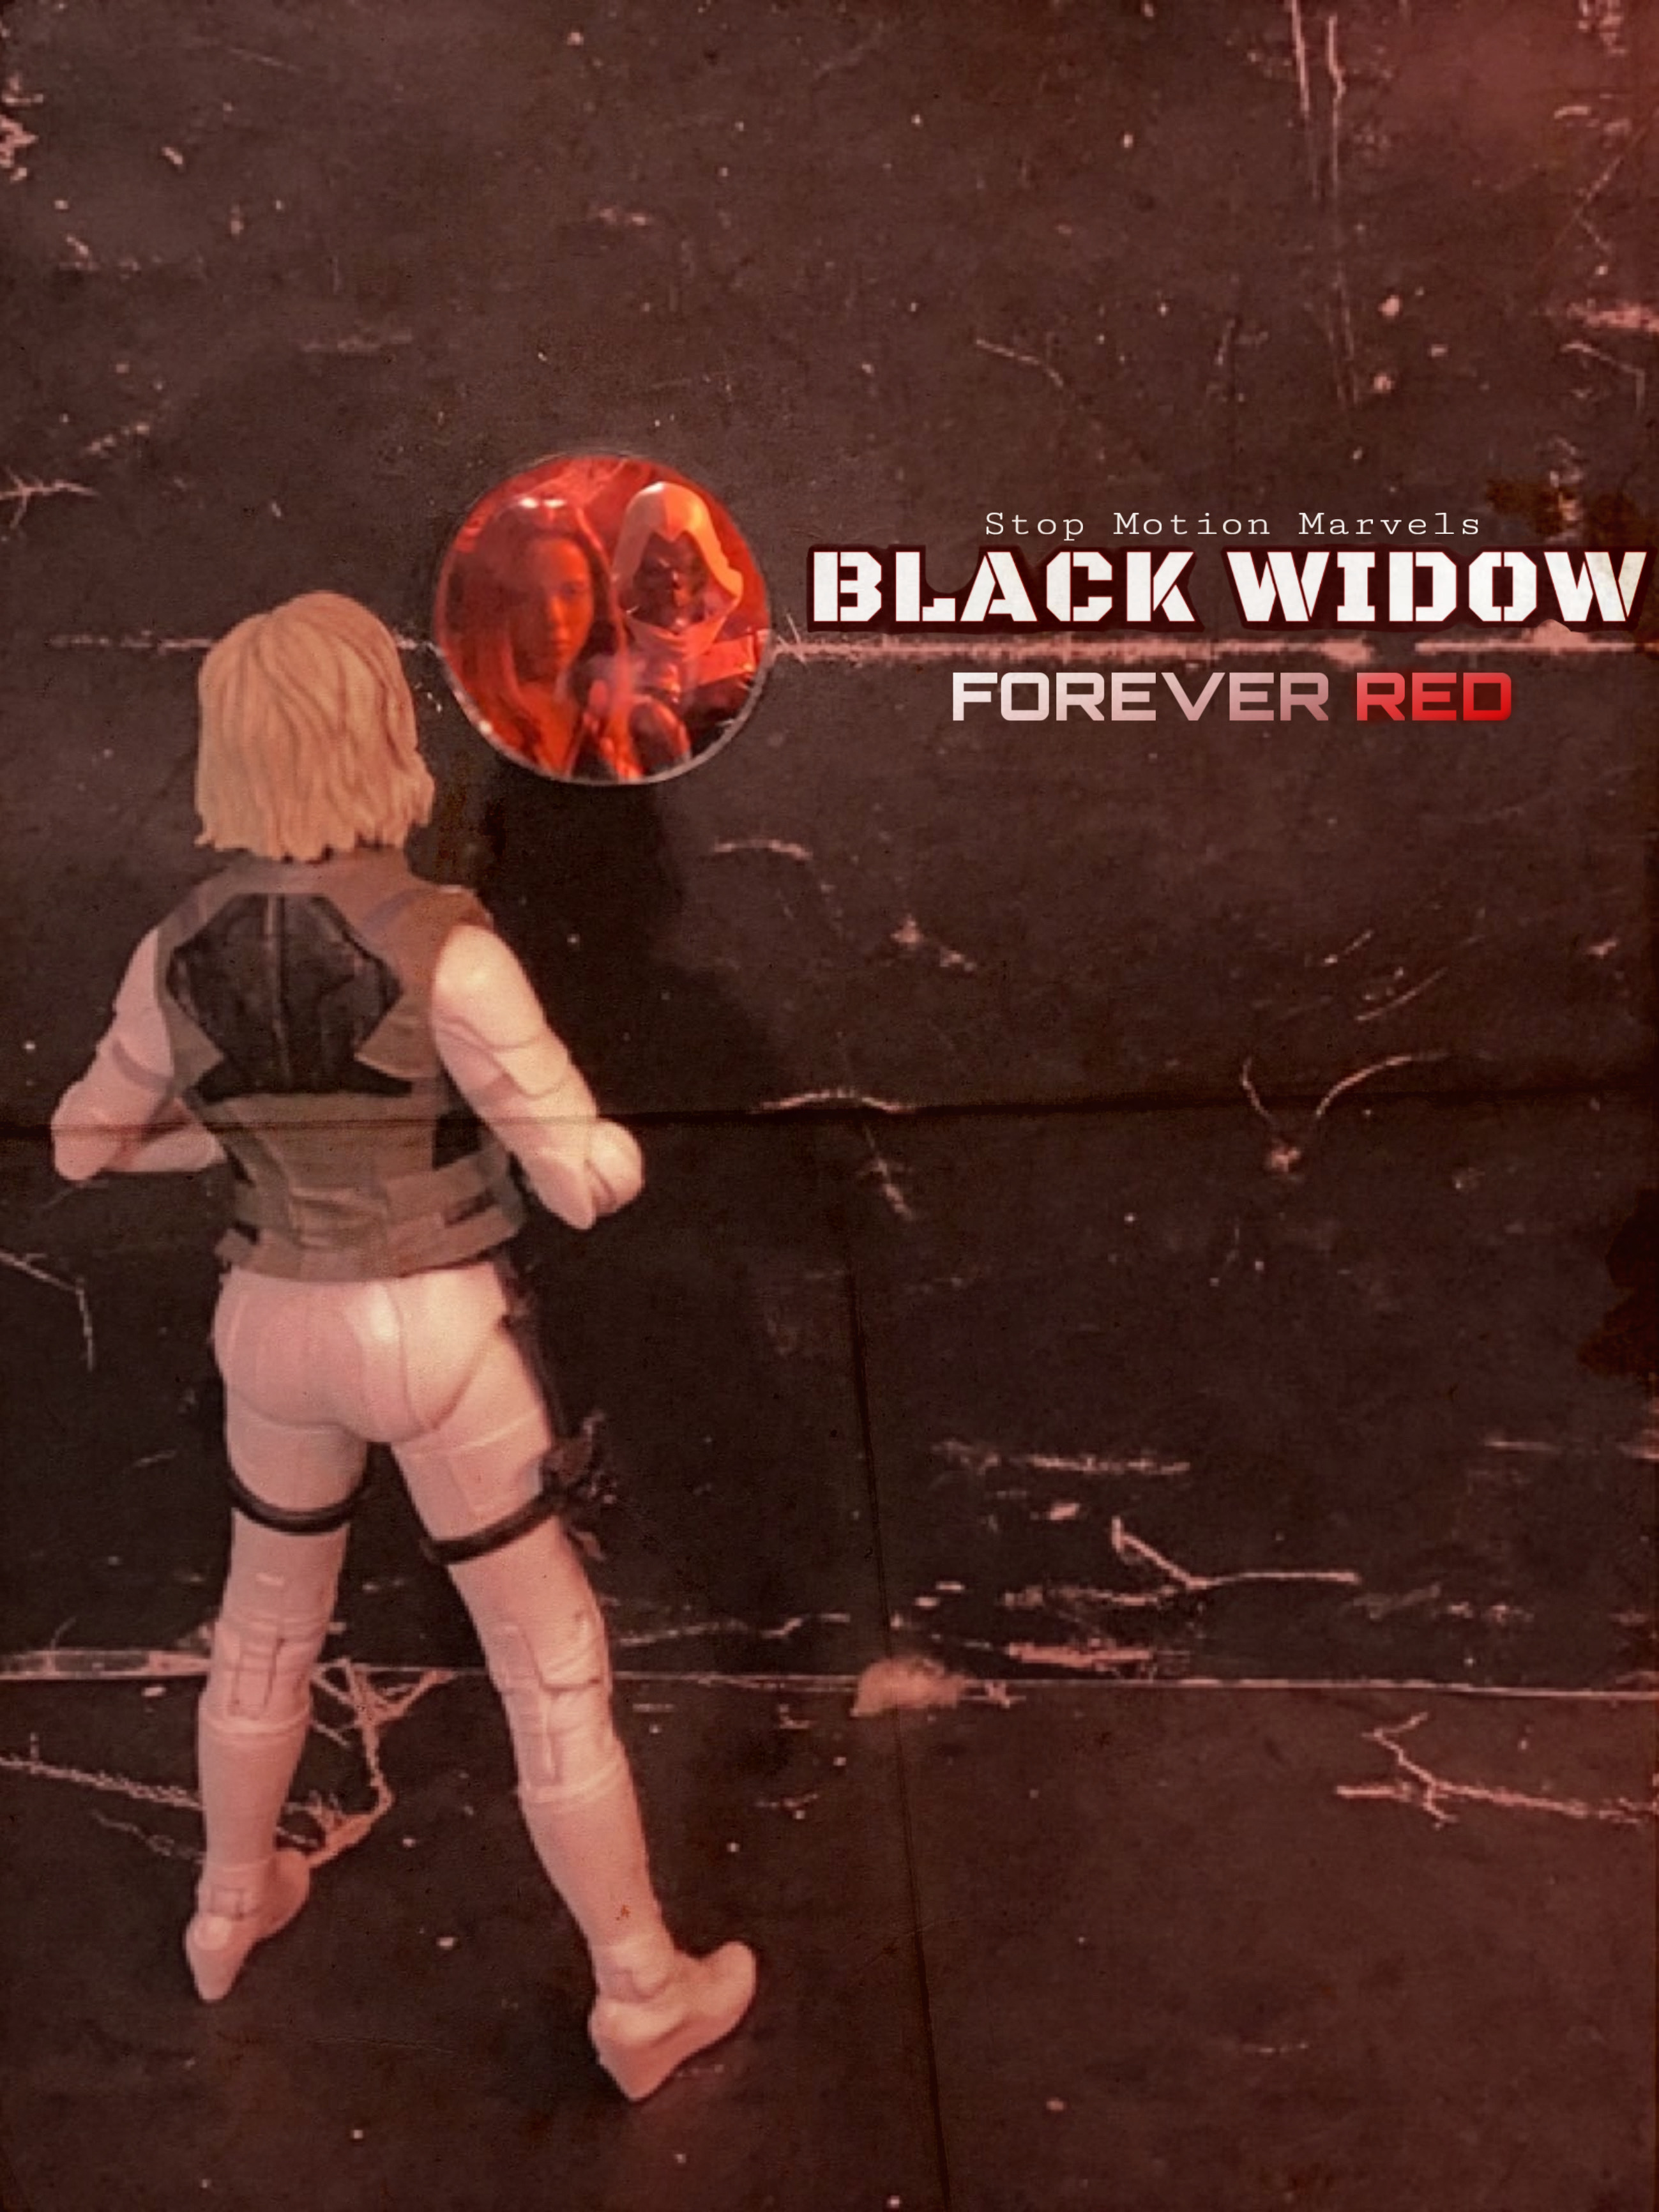 Black Widow: Forever Red Part 1 and 2